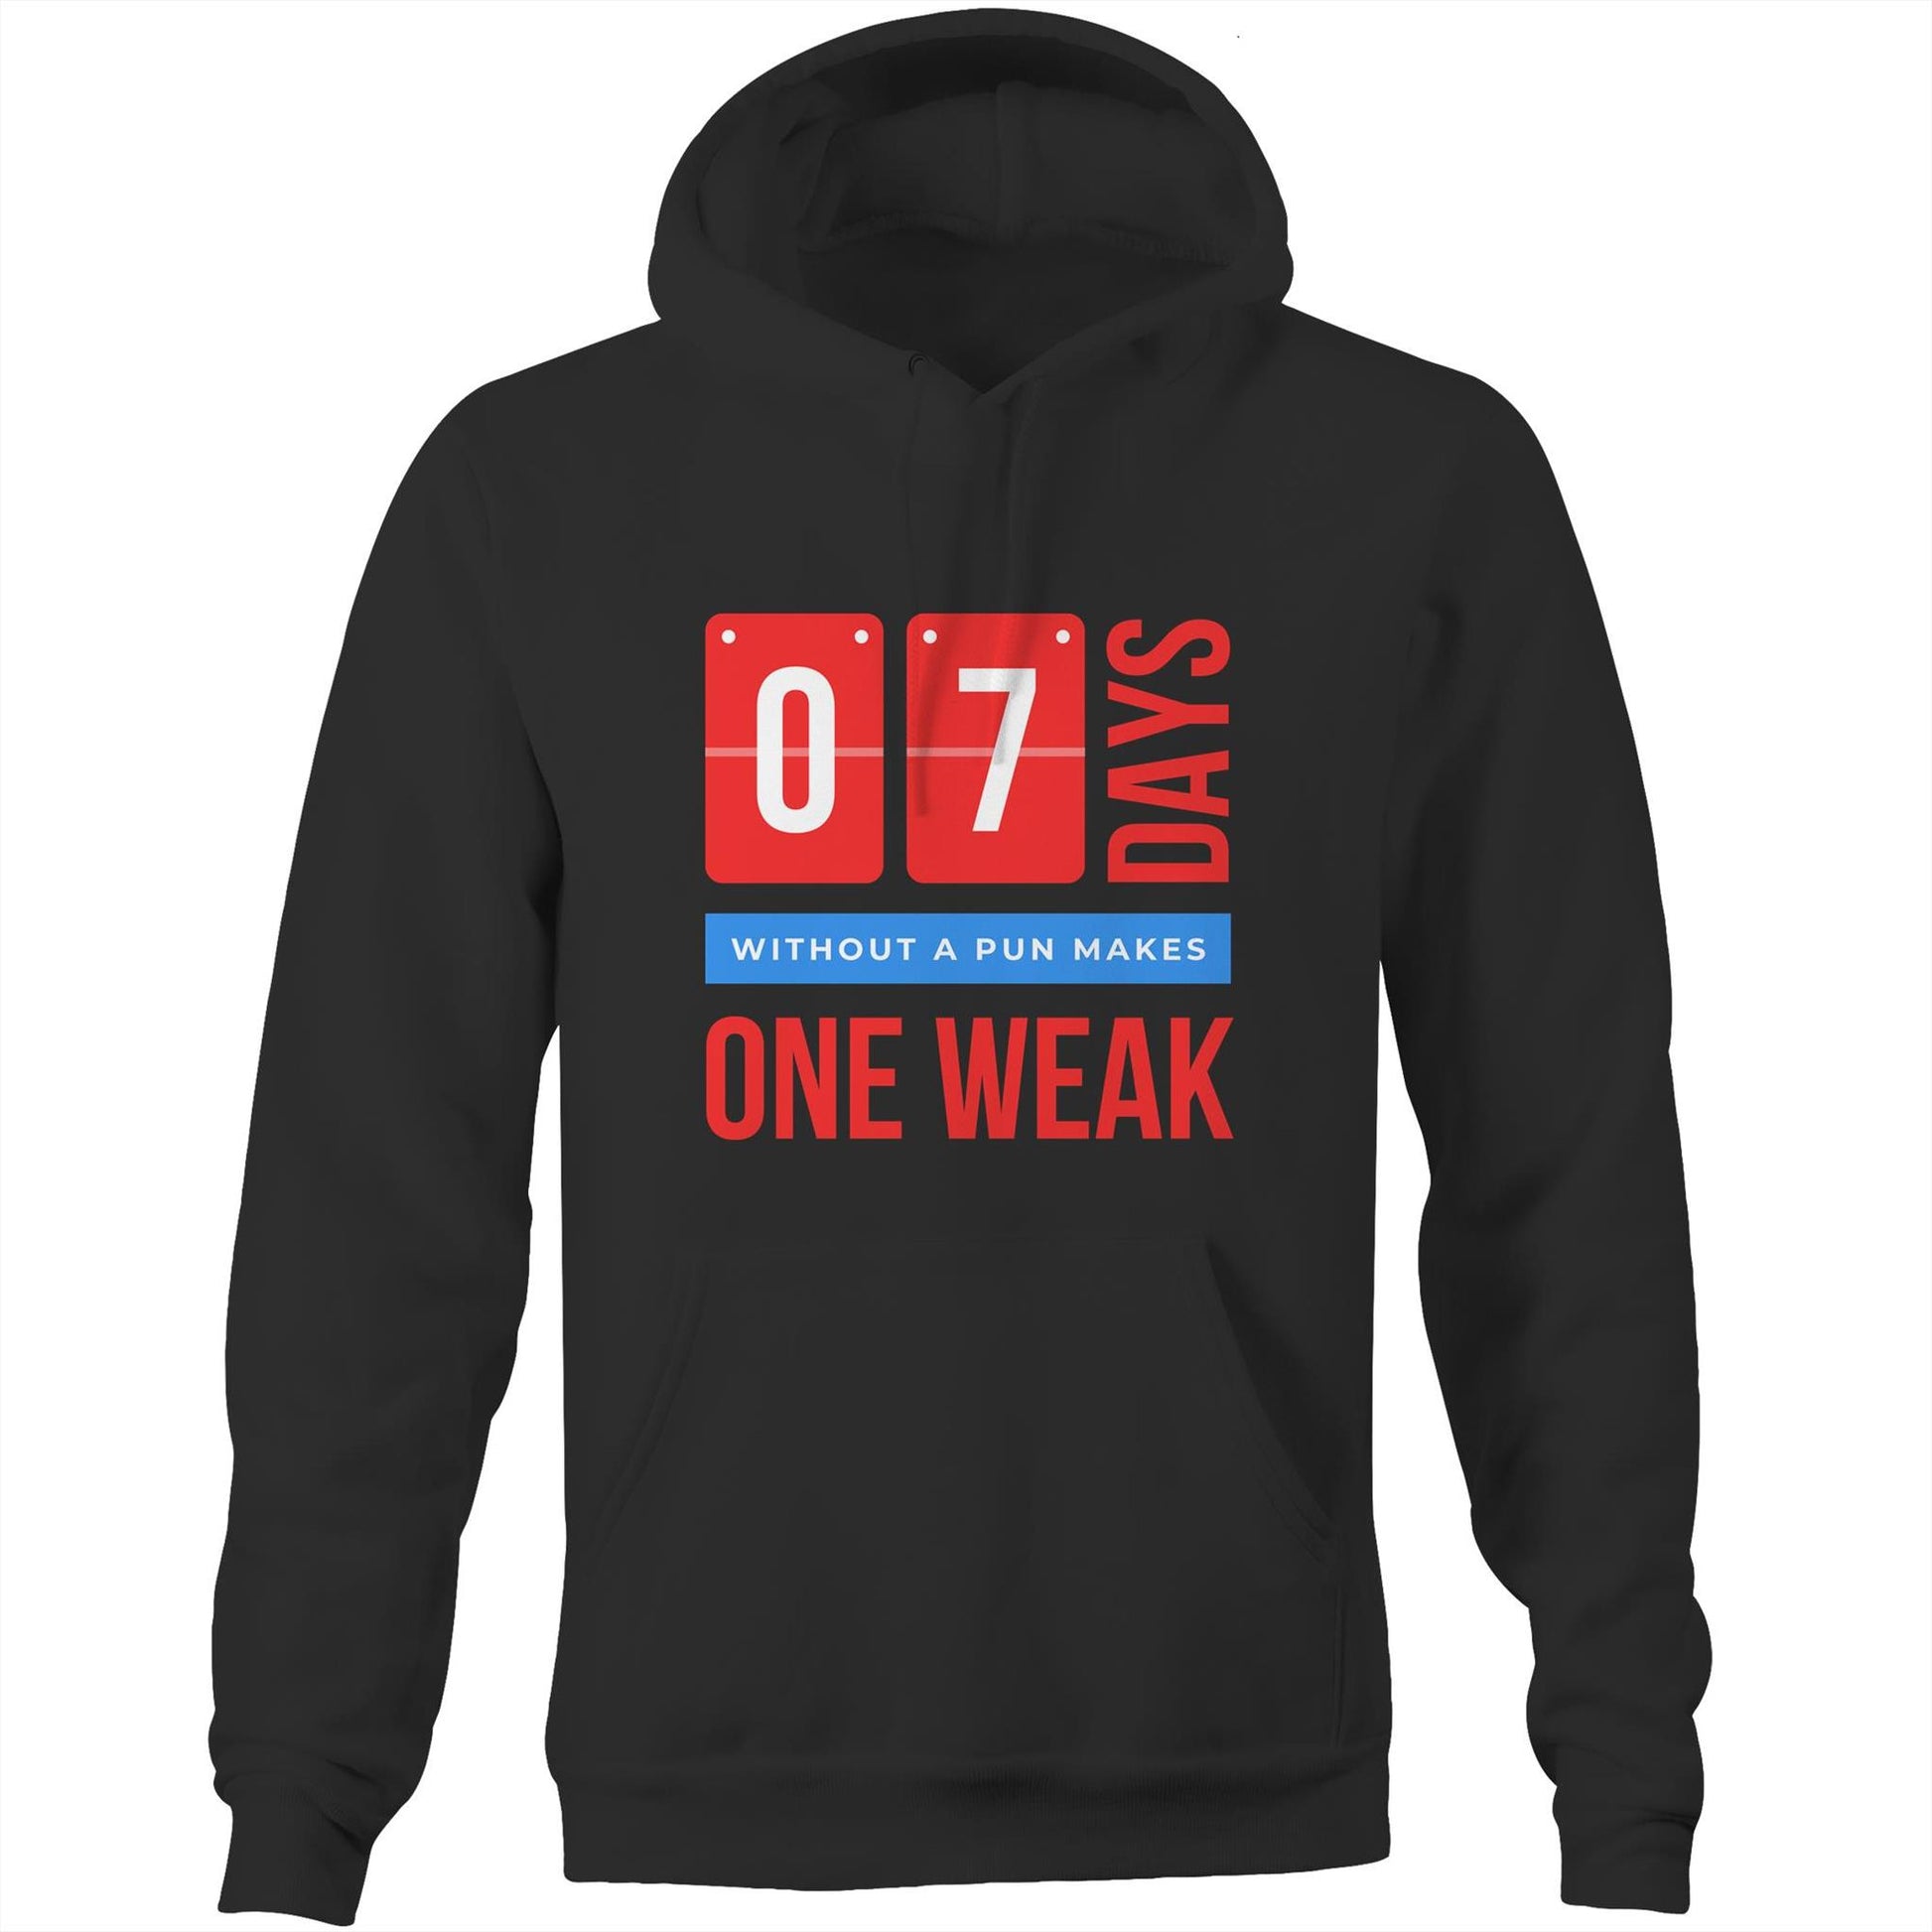 7 Days Without A Pun - Pocket Hoodie Sweatshirt Black Heavyweight Hoodie Funny